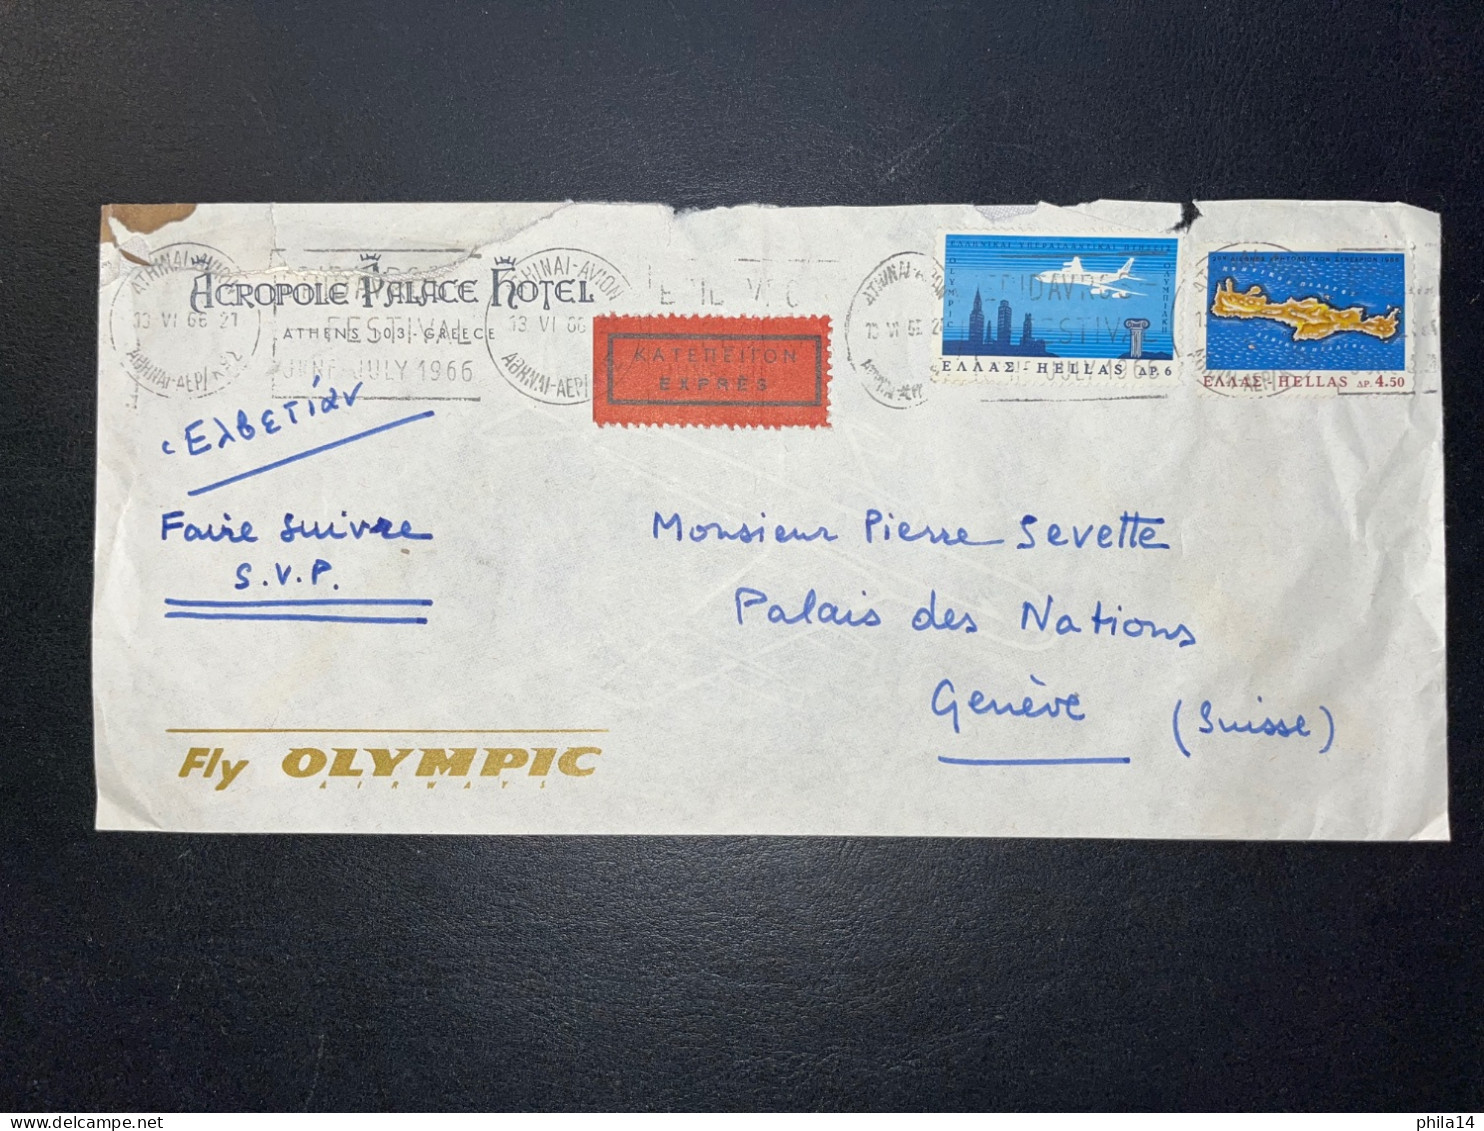 ENVELOPPE GRECE 1966 / ATHENES POUR GENEVE SUISSE / FLY OLYMPIC AIR WAYS - Storia Postale